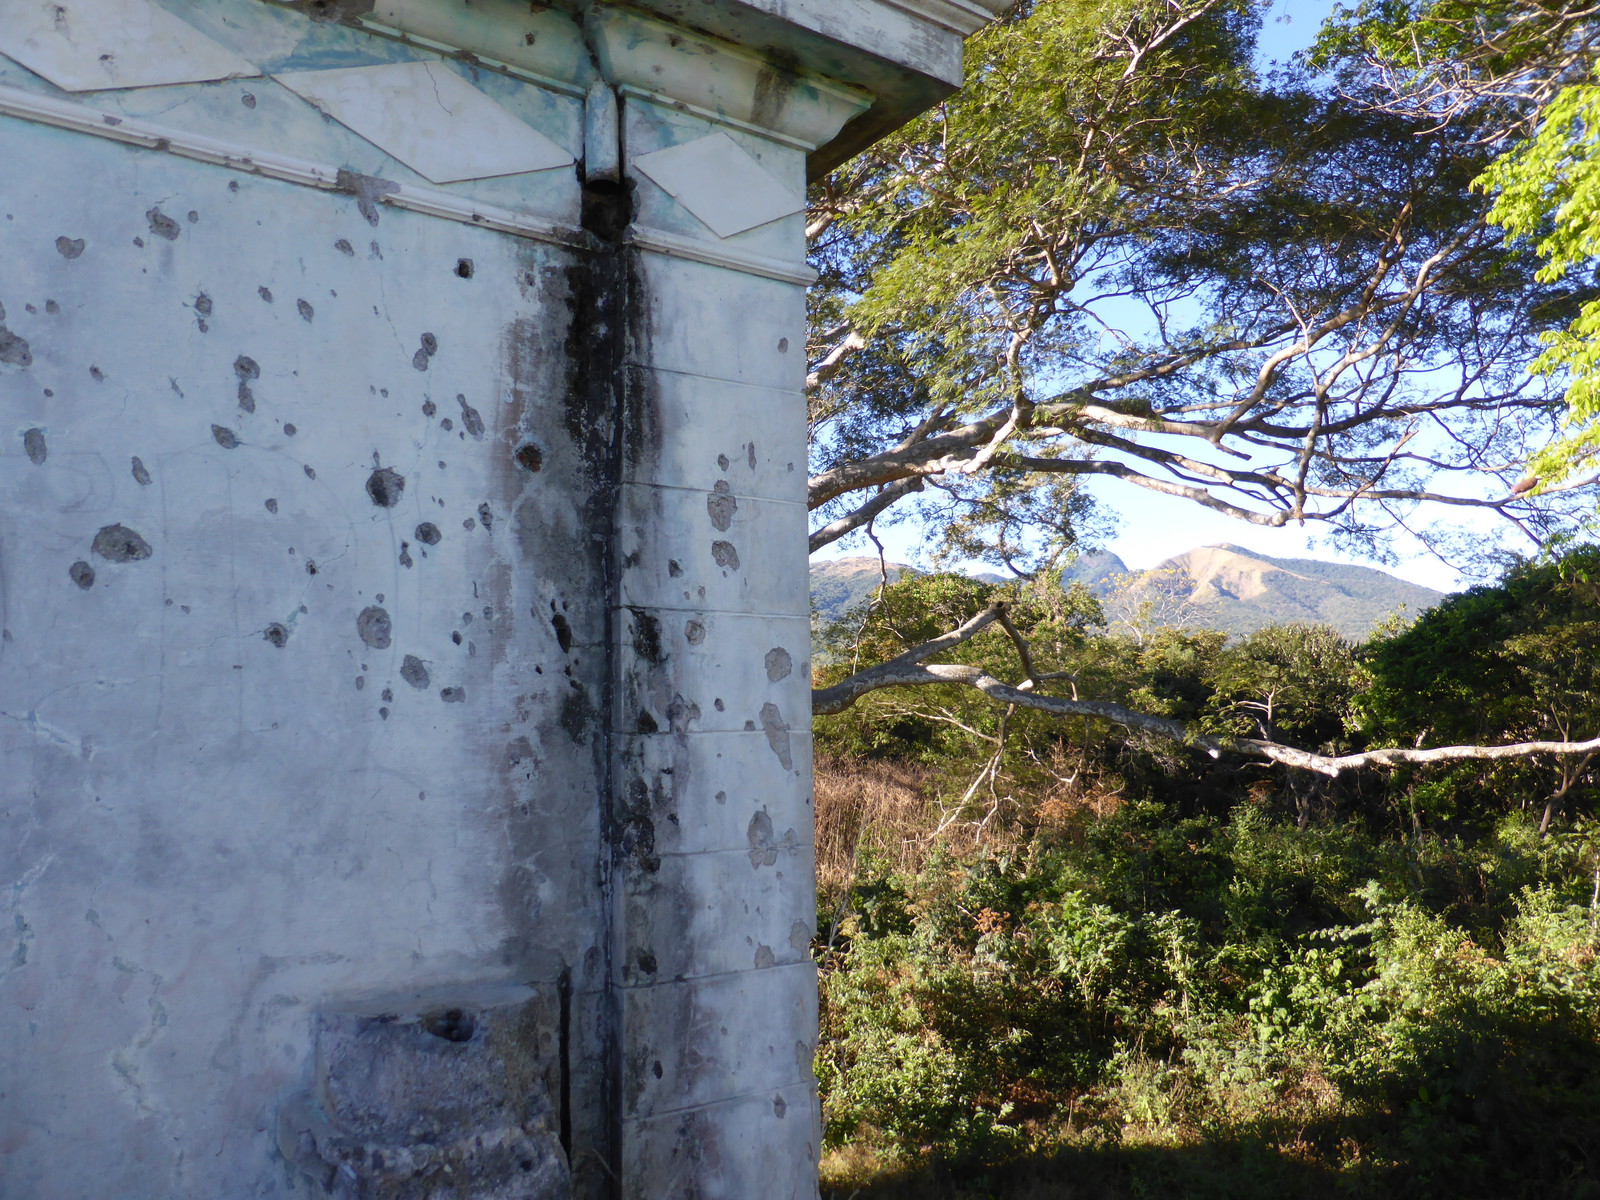 Bullet holes sprayed across the walls of the ex-presidential house